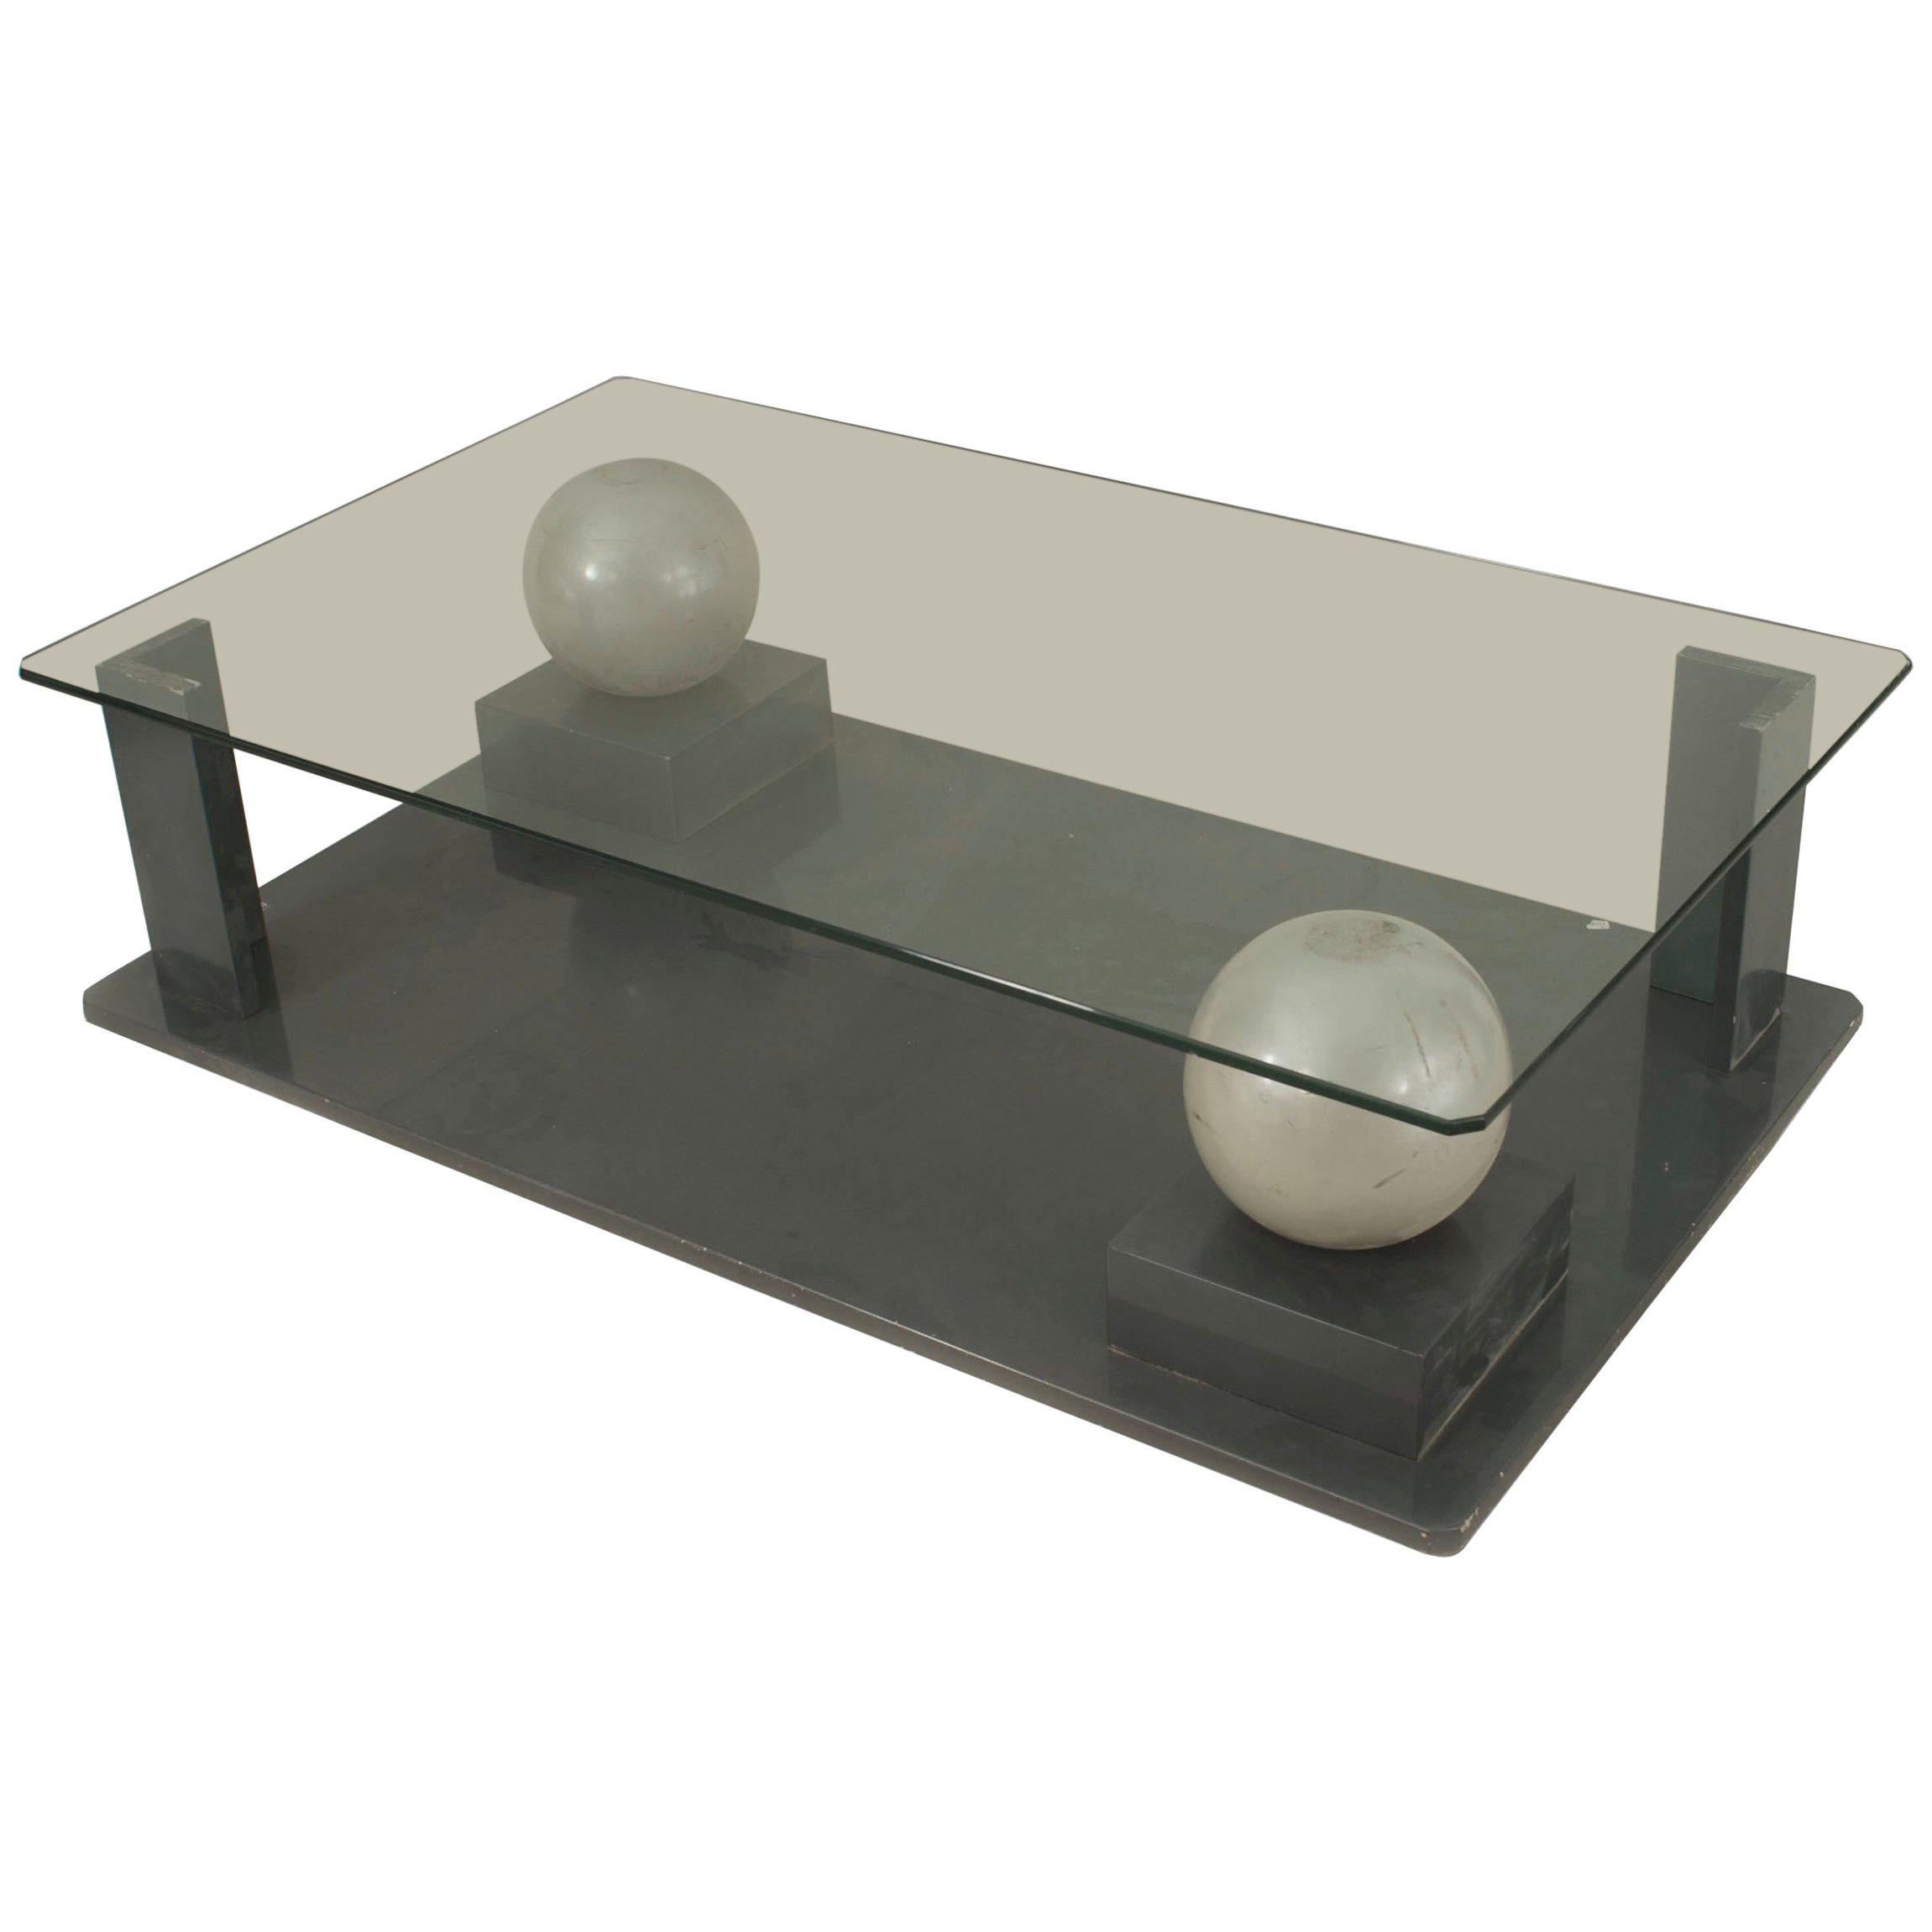 Pierre Cardin French Modern Geometric Lacquer and Glass Coffee Table